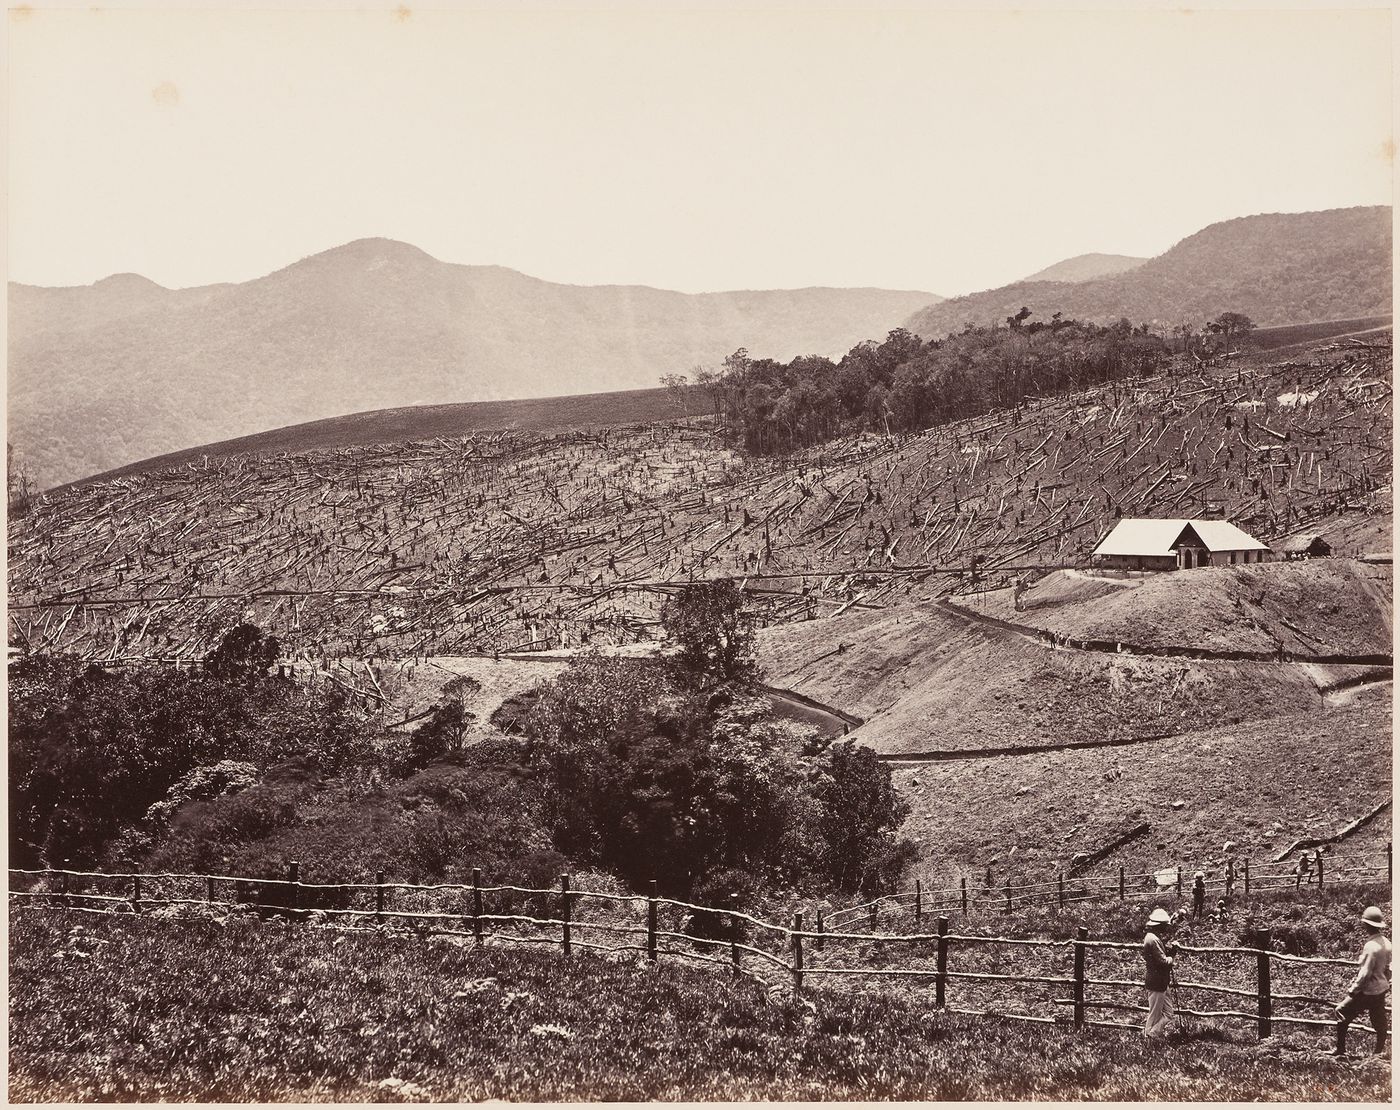 View of a plantation with a fence in the foreground, Ceylon (now Sri Lanka)